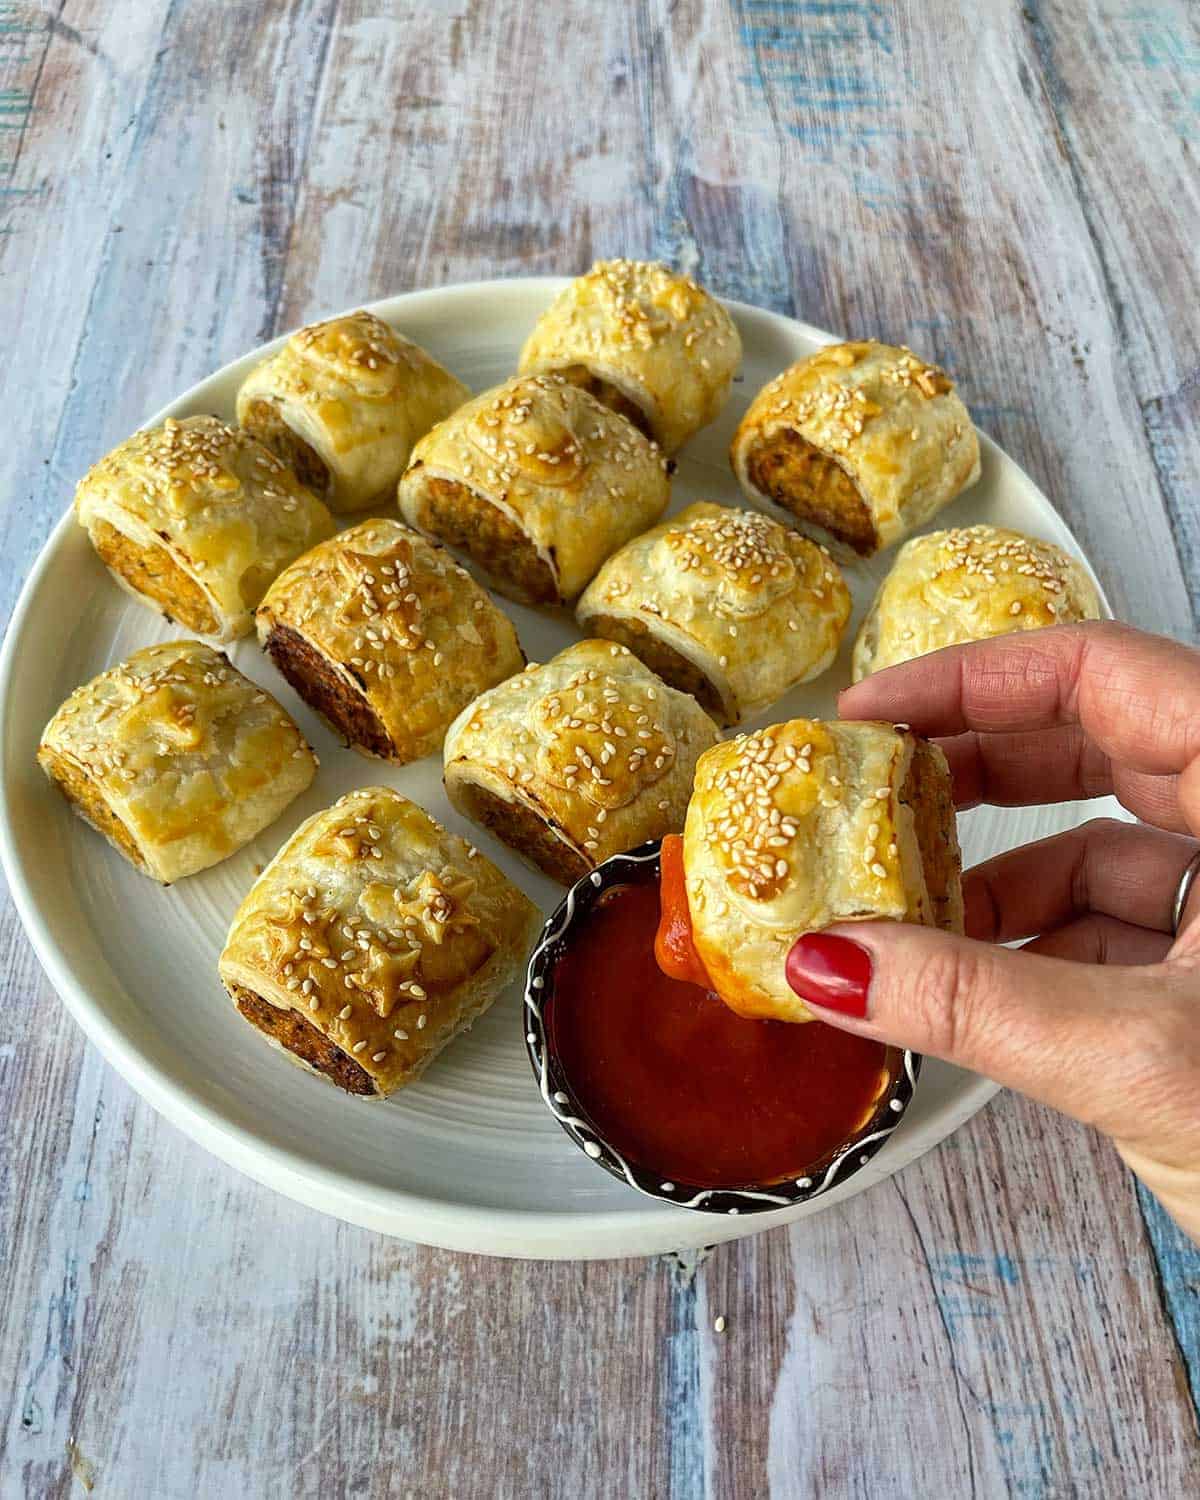 A hand holding a sausage roll, dipped in tomato sauce taken from a platter of sausage rolls.